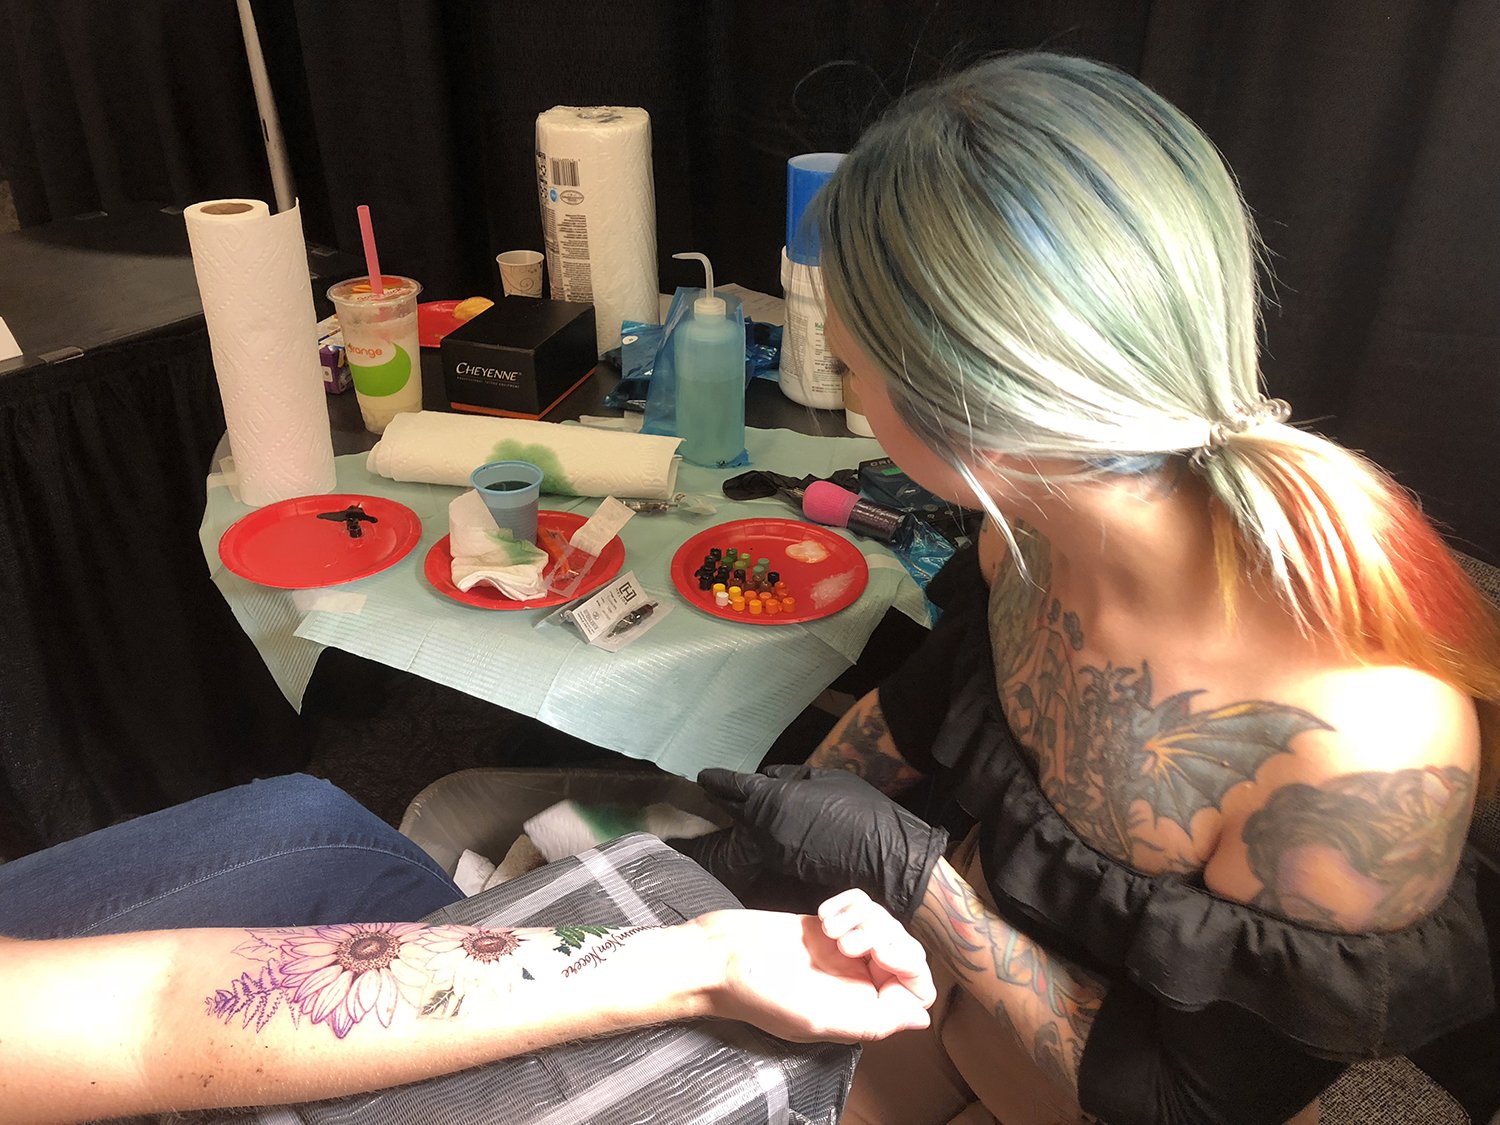 flower tattoo on arm by megan massacre, vancouver tattoo convention